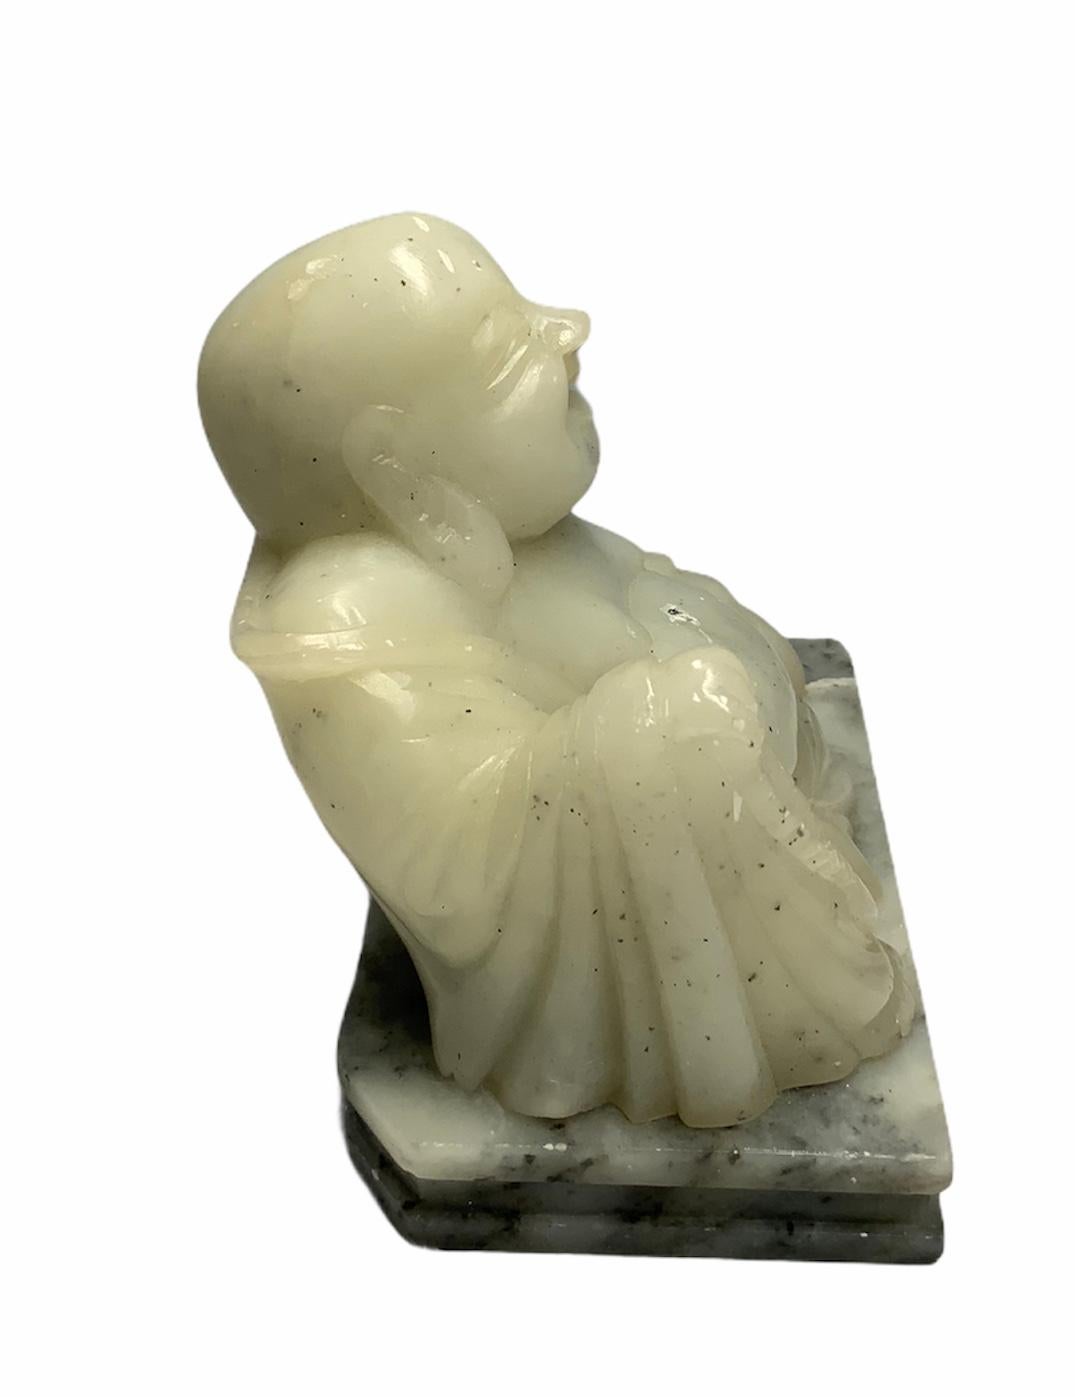 This is a carved Jade figure of a sitting Happy Buddha. He is sitting over a rectangular marble base.